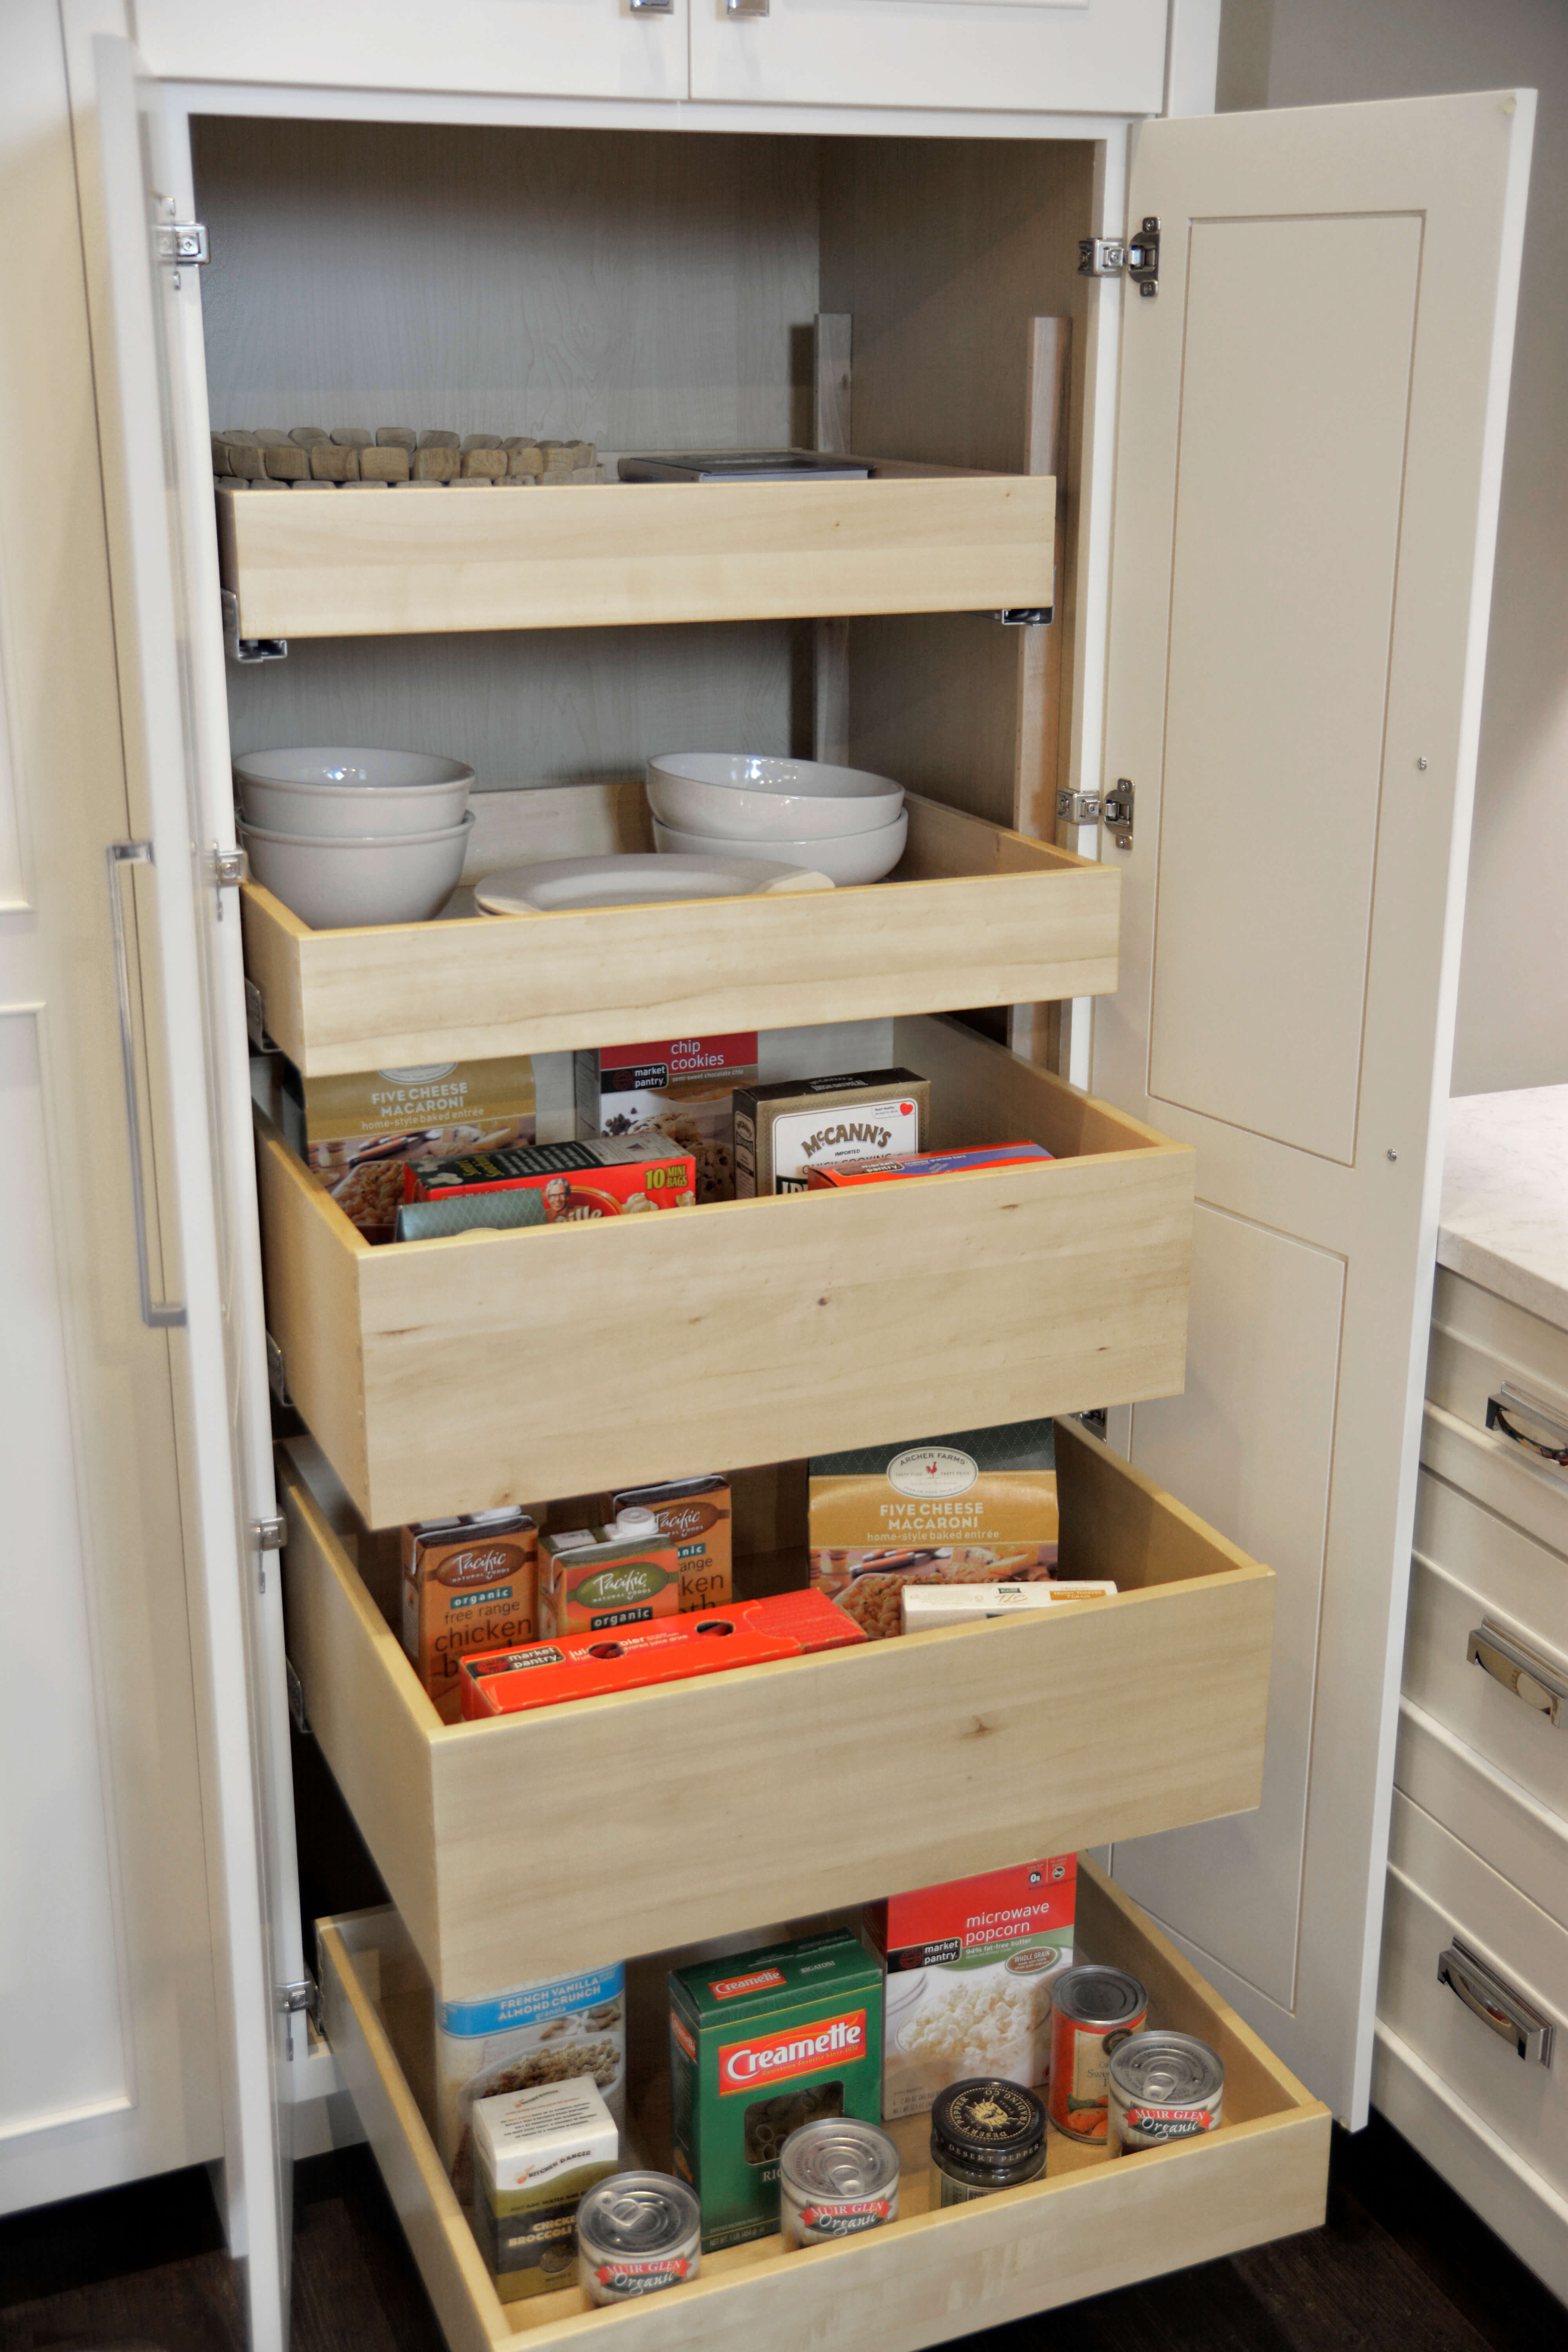 Dura Supreme tall pantry cabinet with roll-out shelves for easy storage.